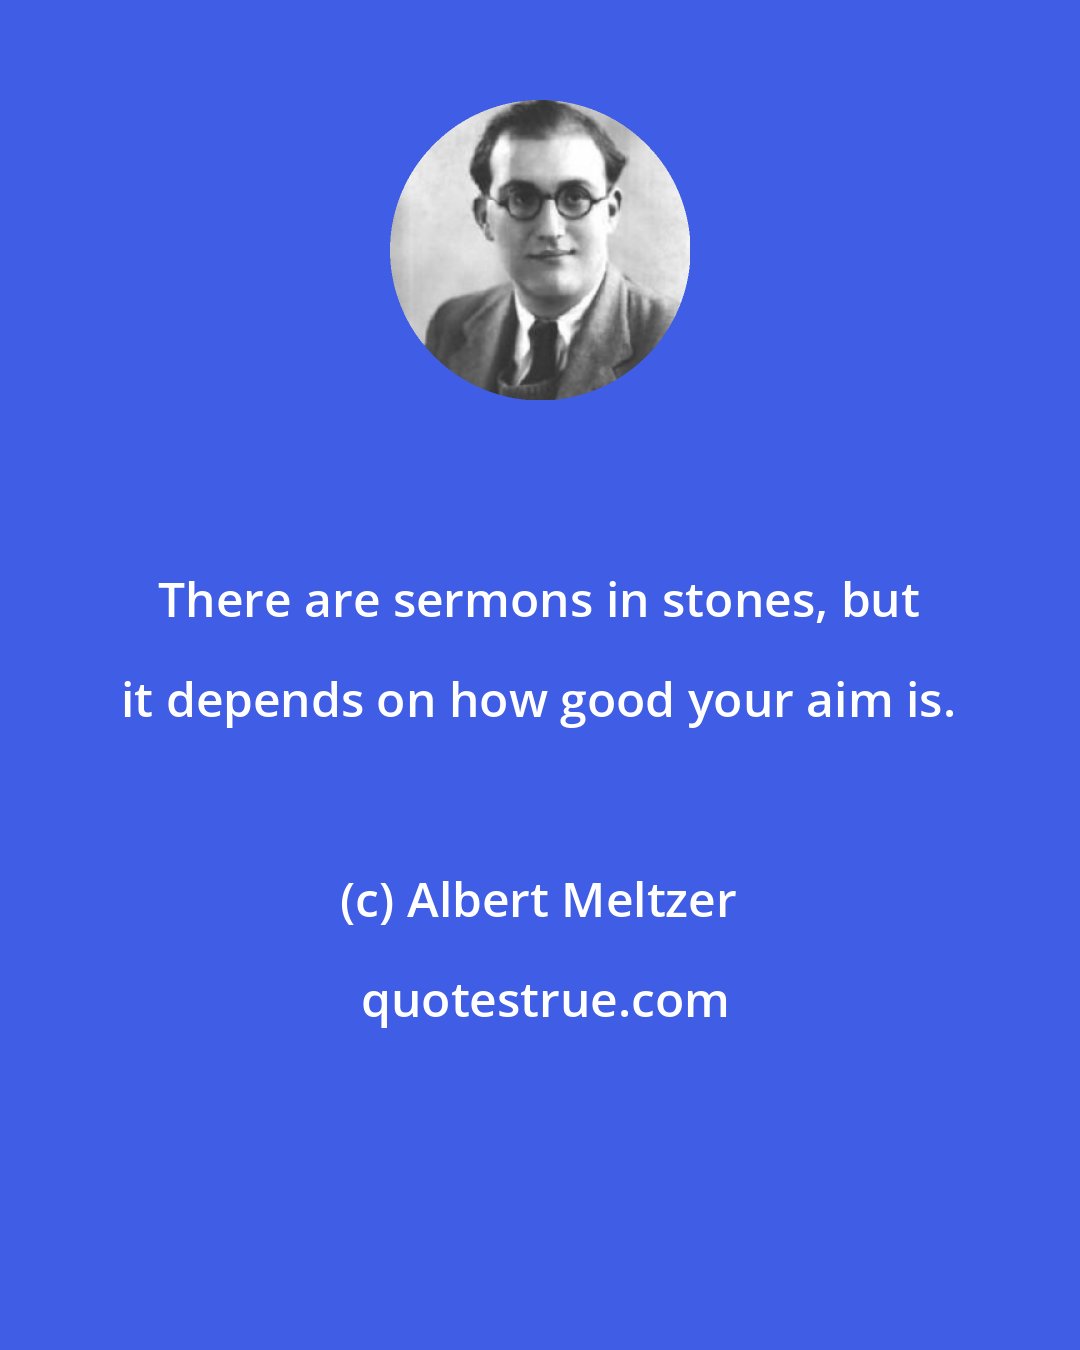 Albert Meltzer: There are sermons in stones, but it depends on how good your aim is.